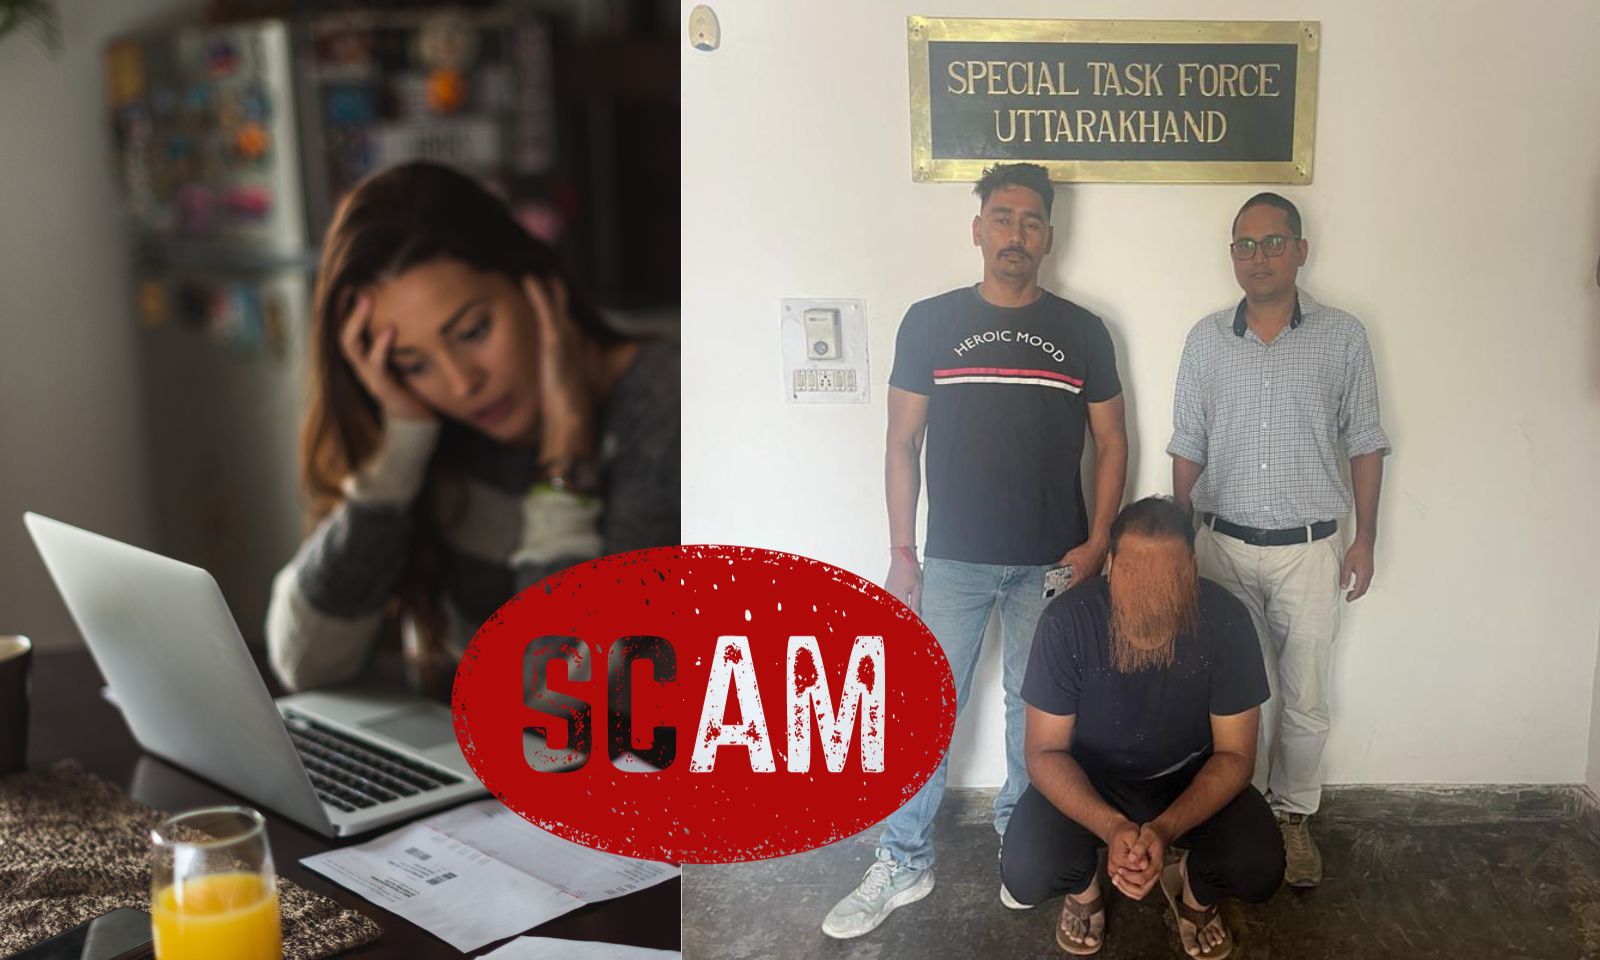 Mastermind of Rs 21 Crore Online Job Scam Arrested By Uttarakhand STF